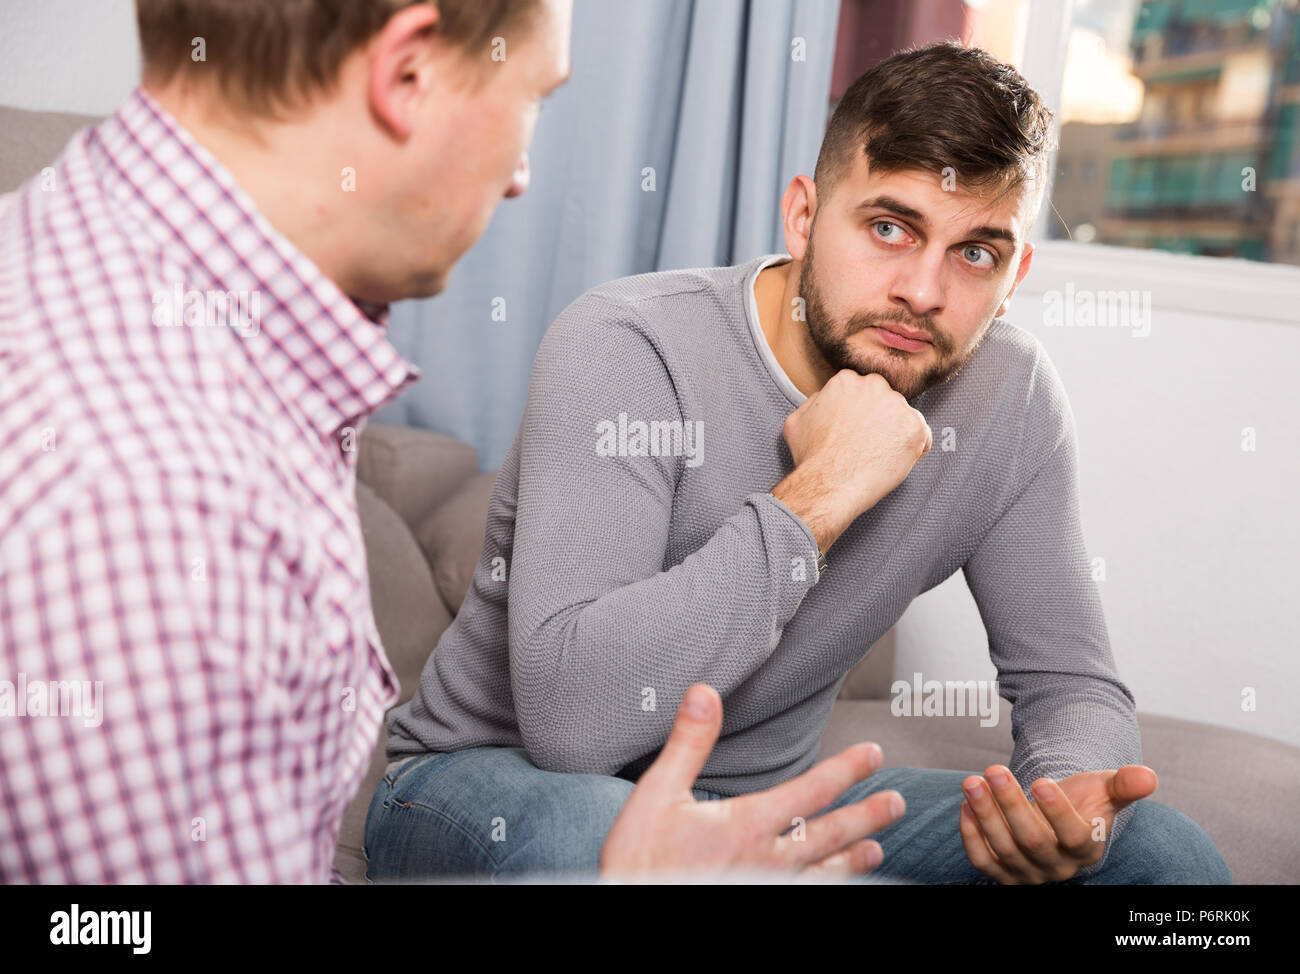 Upset man having unpleasant talk with male colleague on couch in home interior Stock Photo